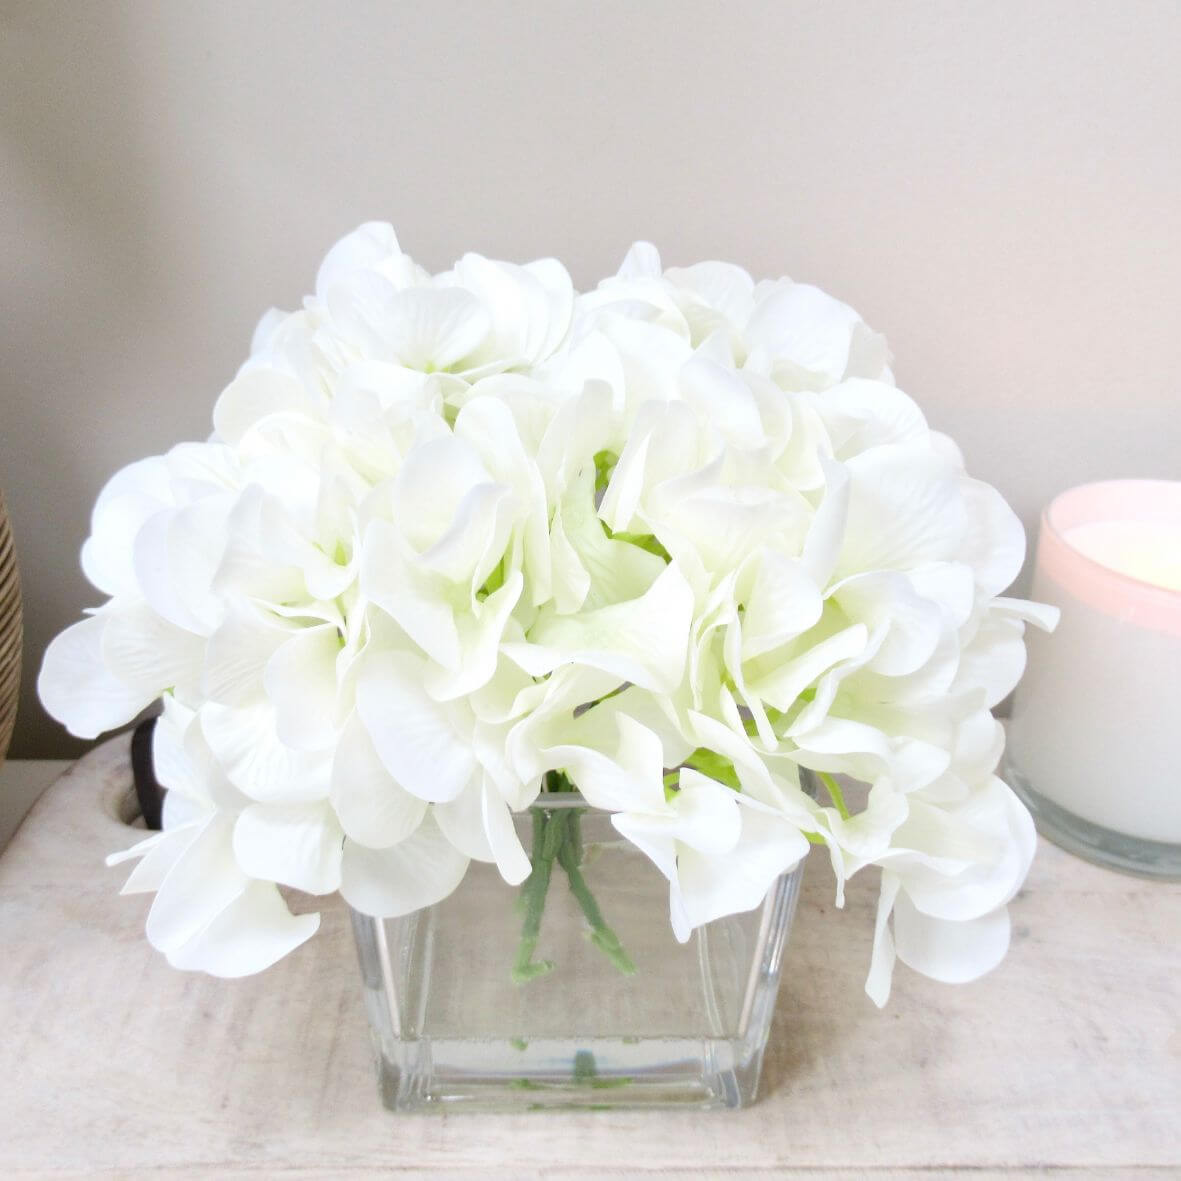 White Hydrangea in faux water in cubed glass vase